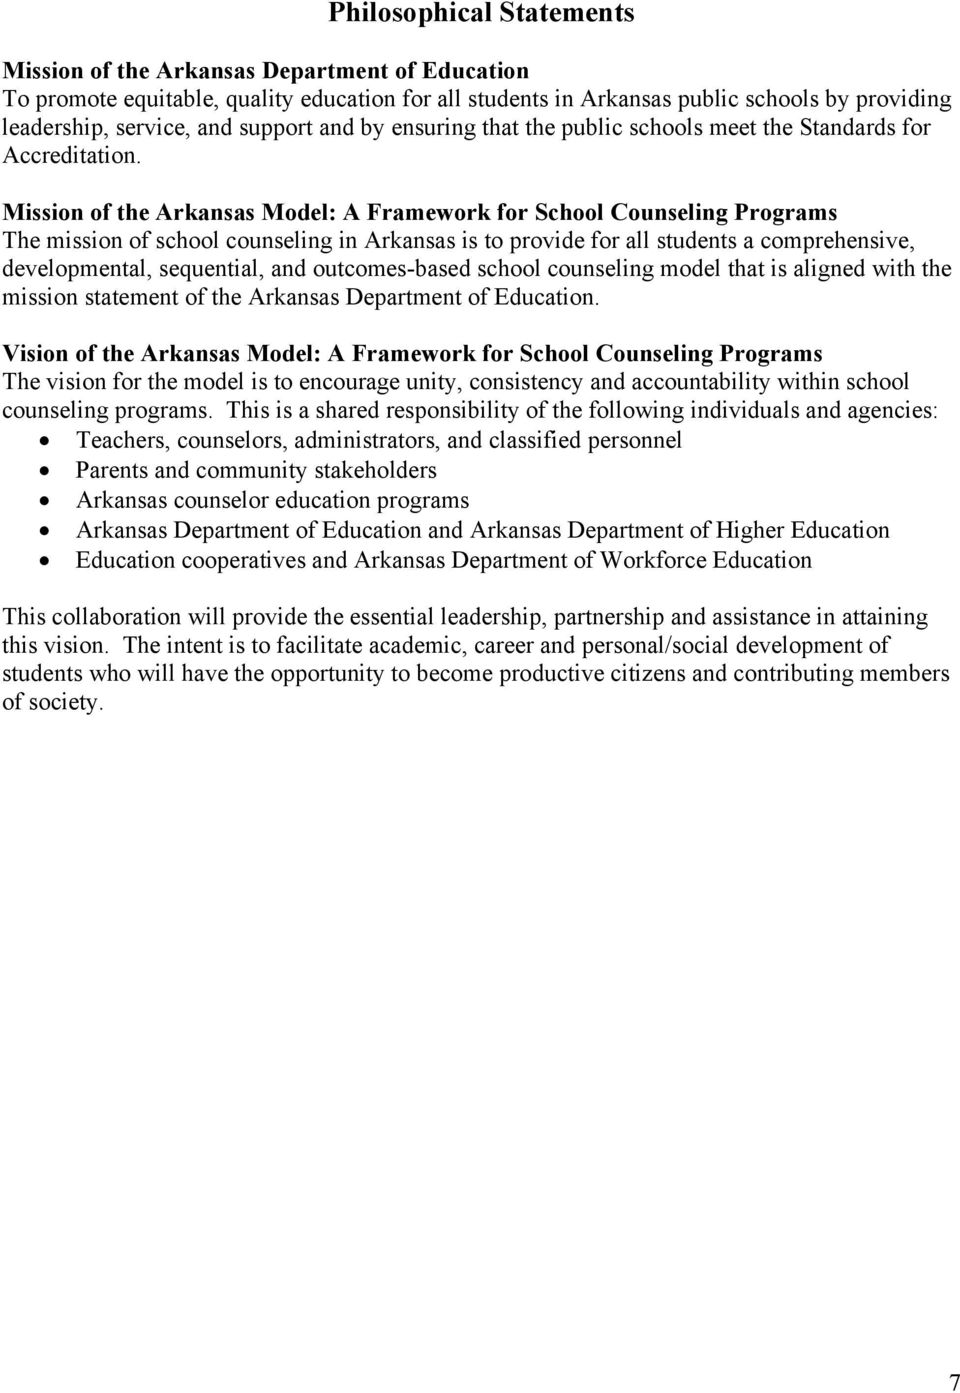 Mission of the Arkansas Model: A Framework for School Counseling Programs The mission of school counseling in Arkansas is to provide for all students a comprehensive, developmental, sequential, and